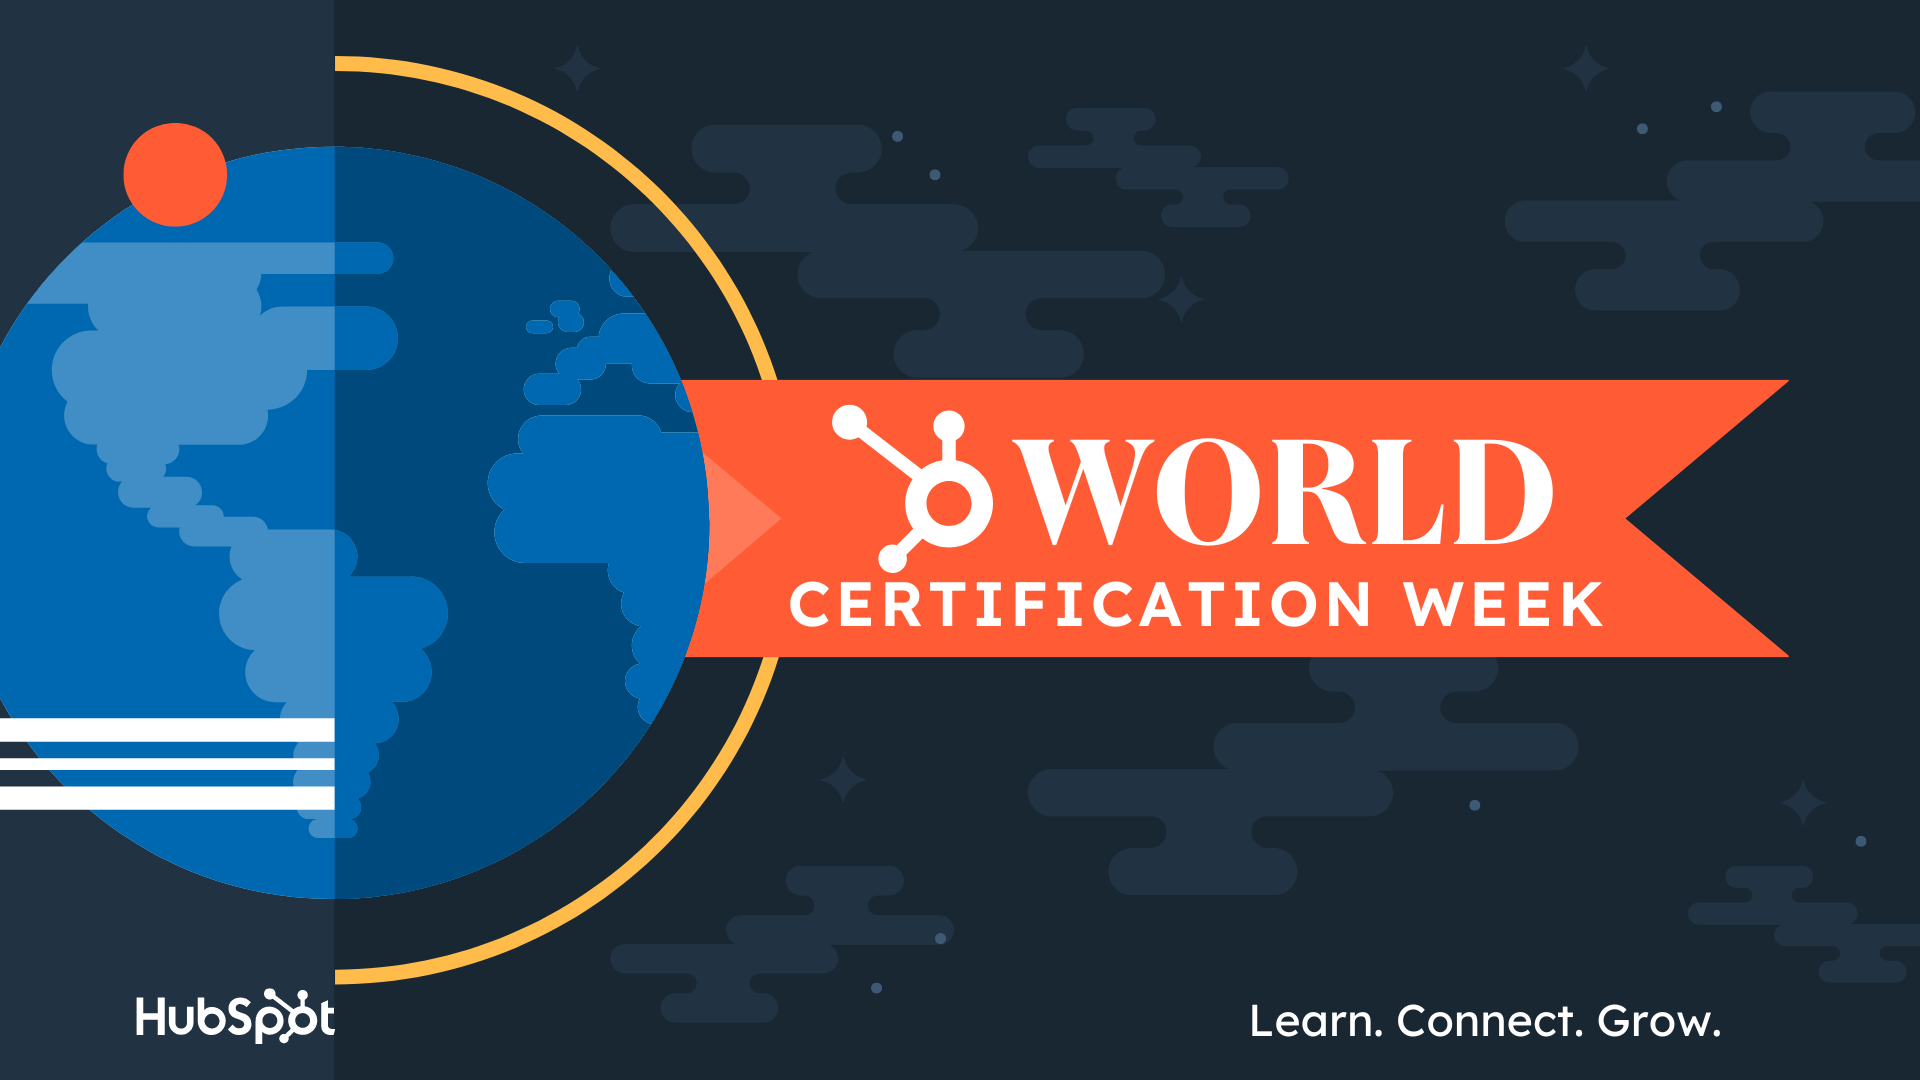 HubSpot Academy to Donate $50,000 and Hit Half Million Certified Users Milestone During Fourth-Annual World Certification Week